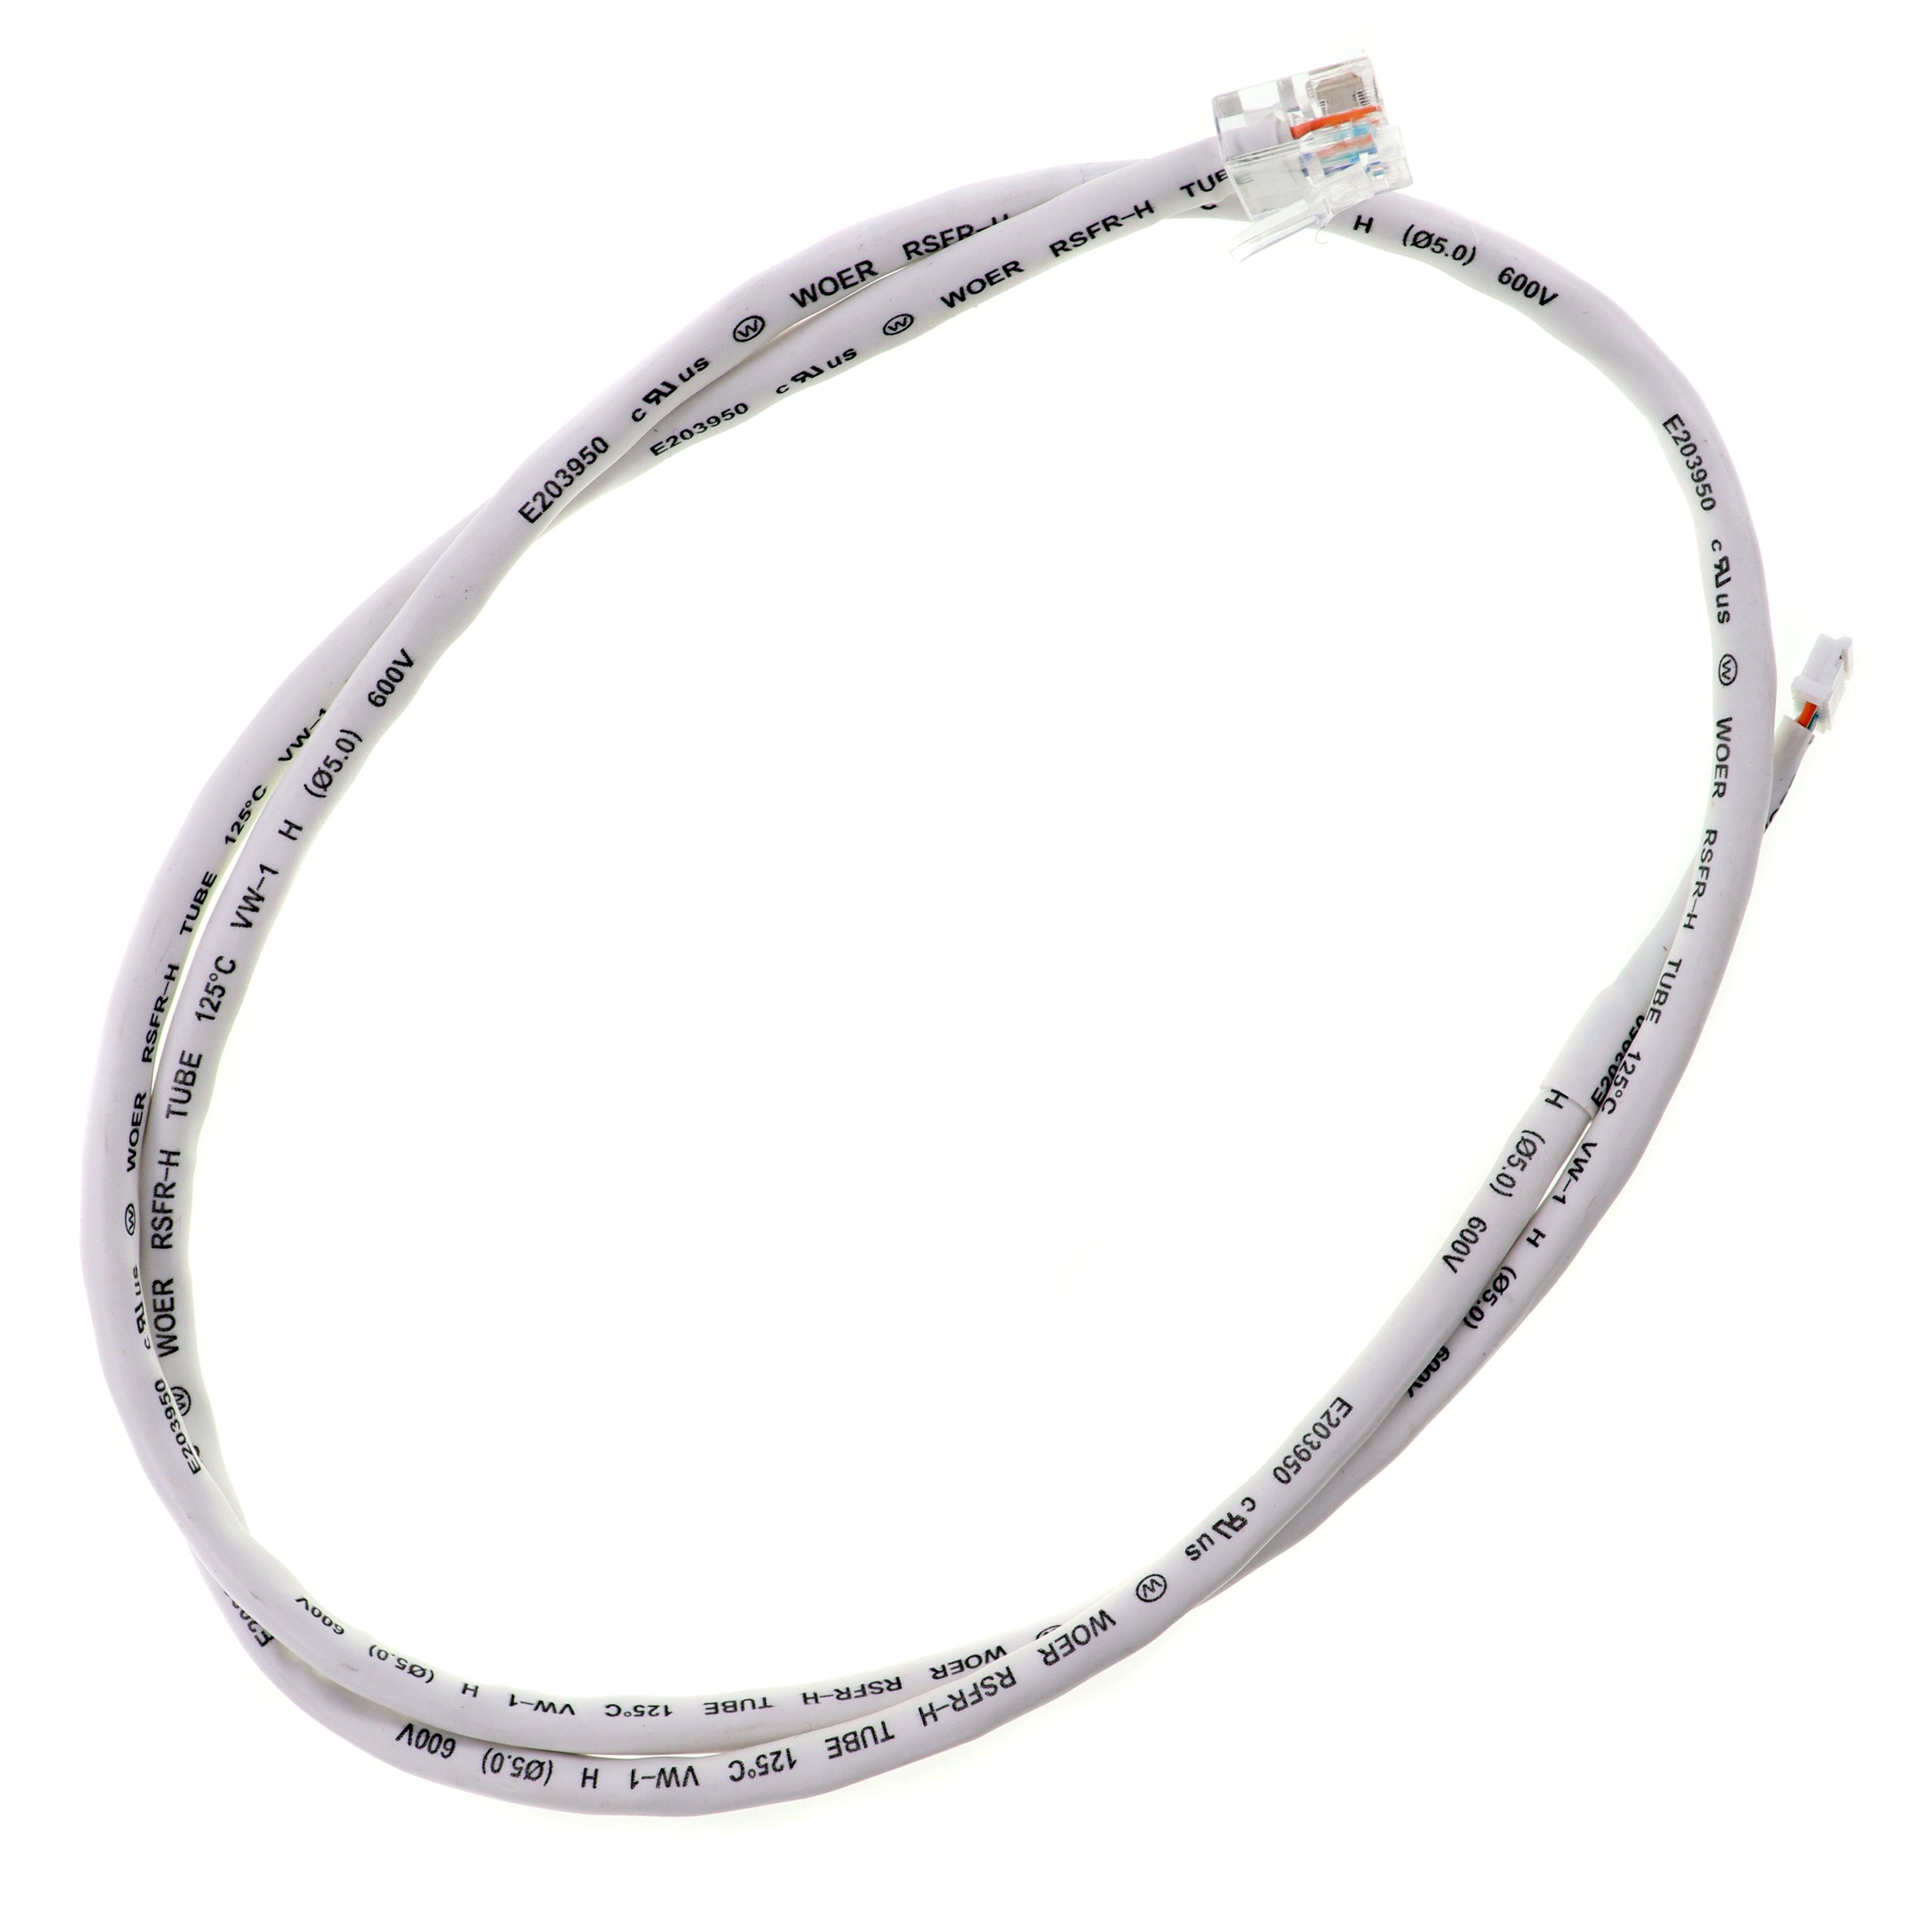 Enlighted Lighting, ENLIGHTED CBL-5E-CU4-30N 12-02290-02 LIGHTING SENSOR CABLE ASSEMBLY FOR CU-4, 30